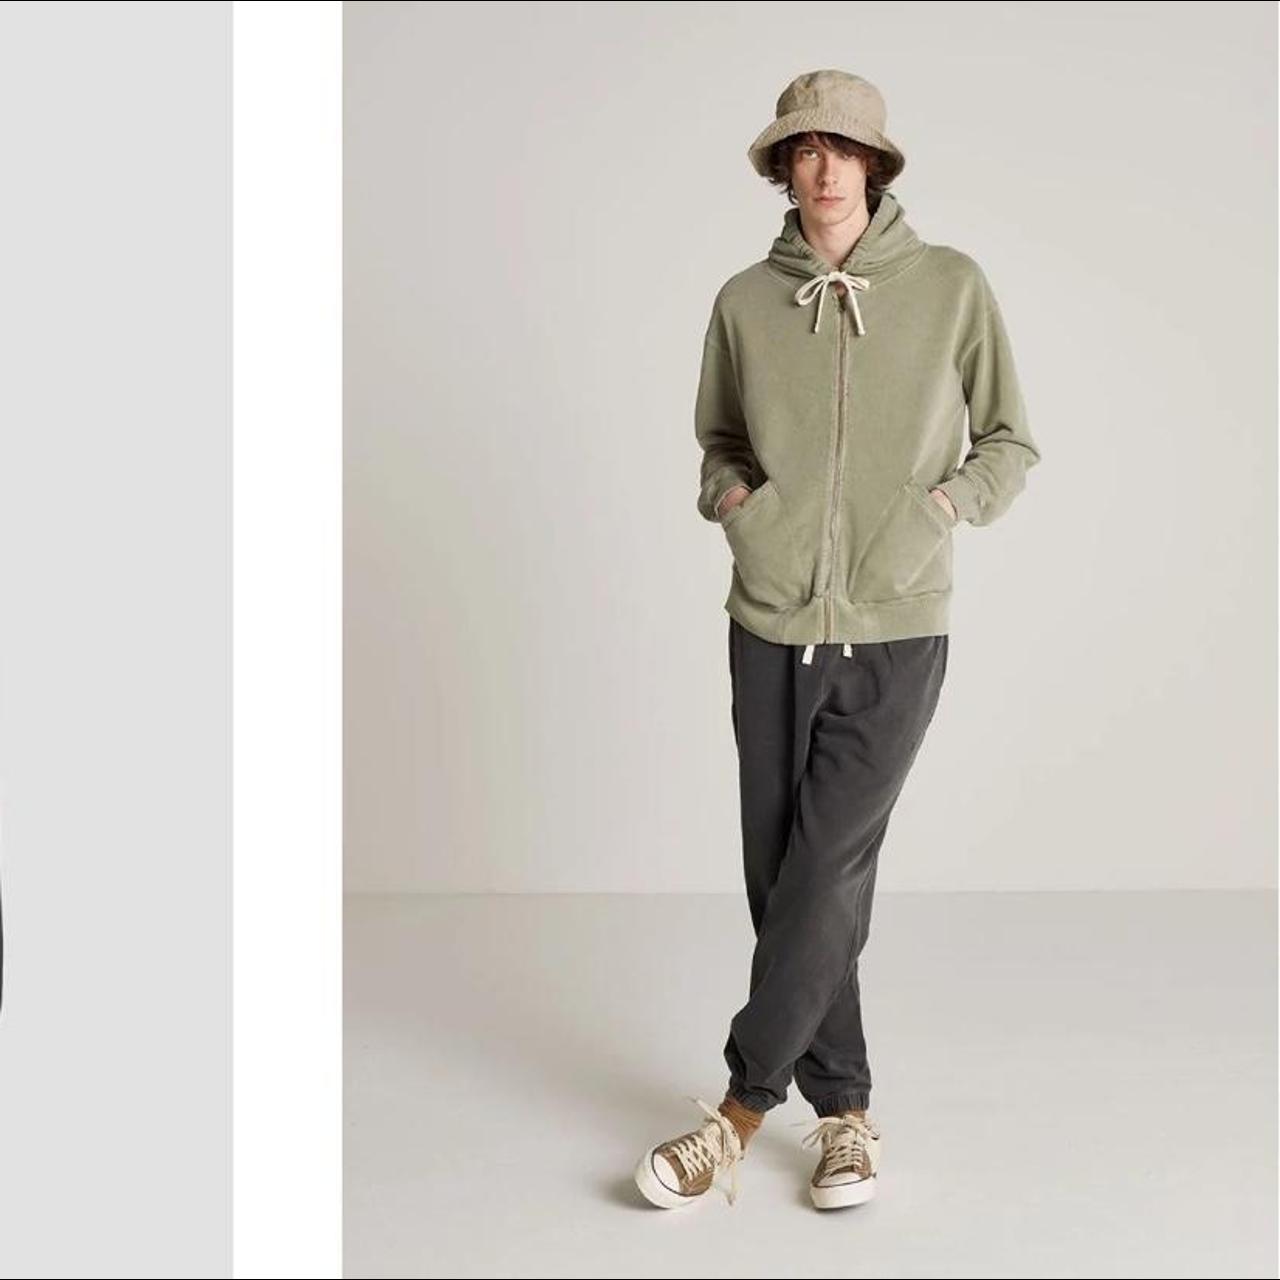 Product Image 4 - Nigel Cabourn Sweatpants

From "The Army